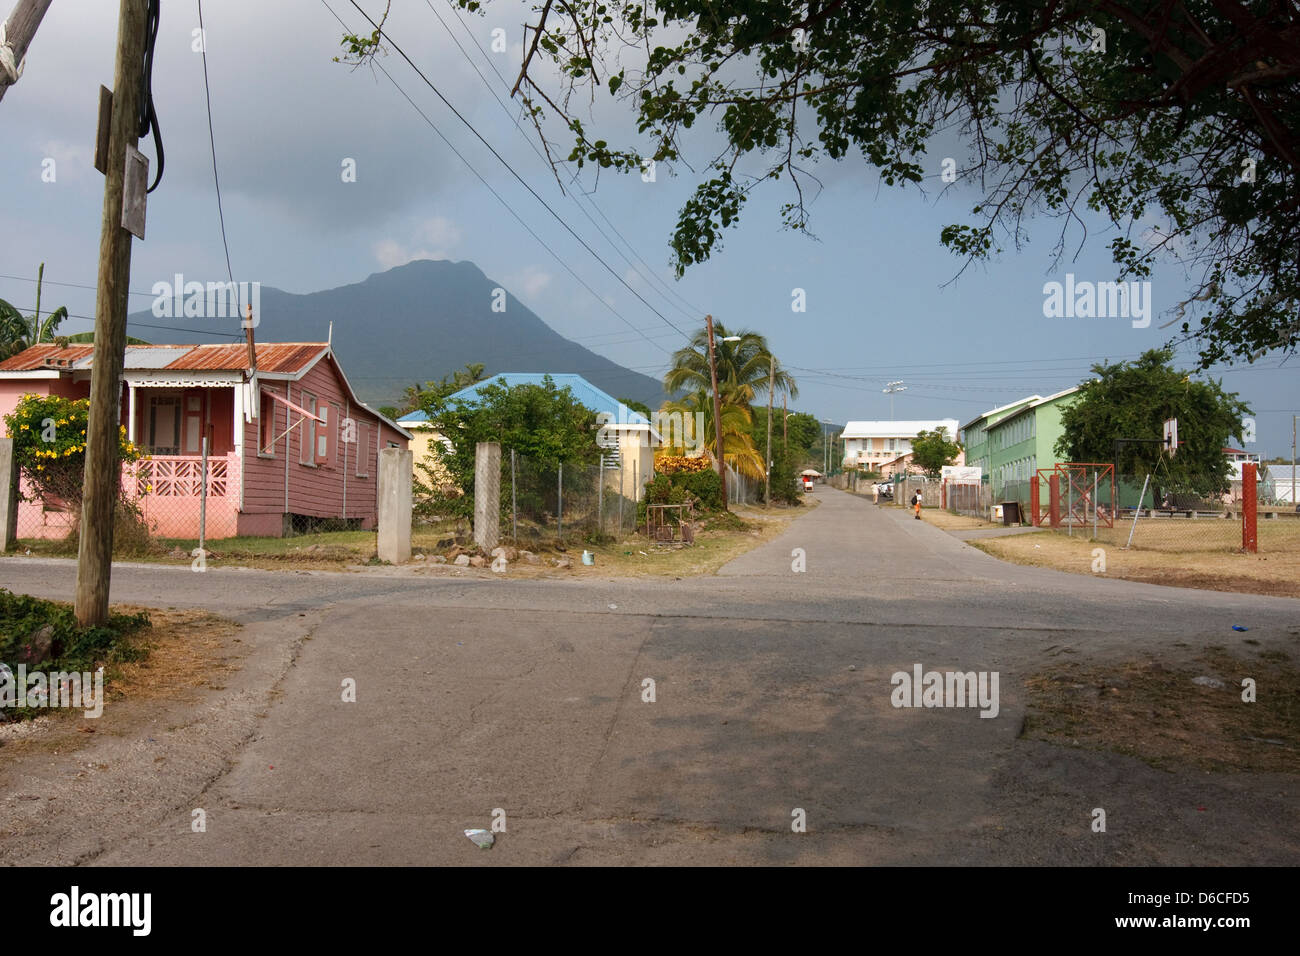 Nevis Peak rises in the distance beyond residential houses on the Caribbean island of Nevis Stock Photo